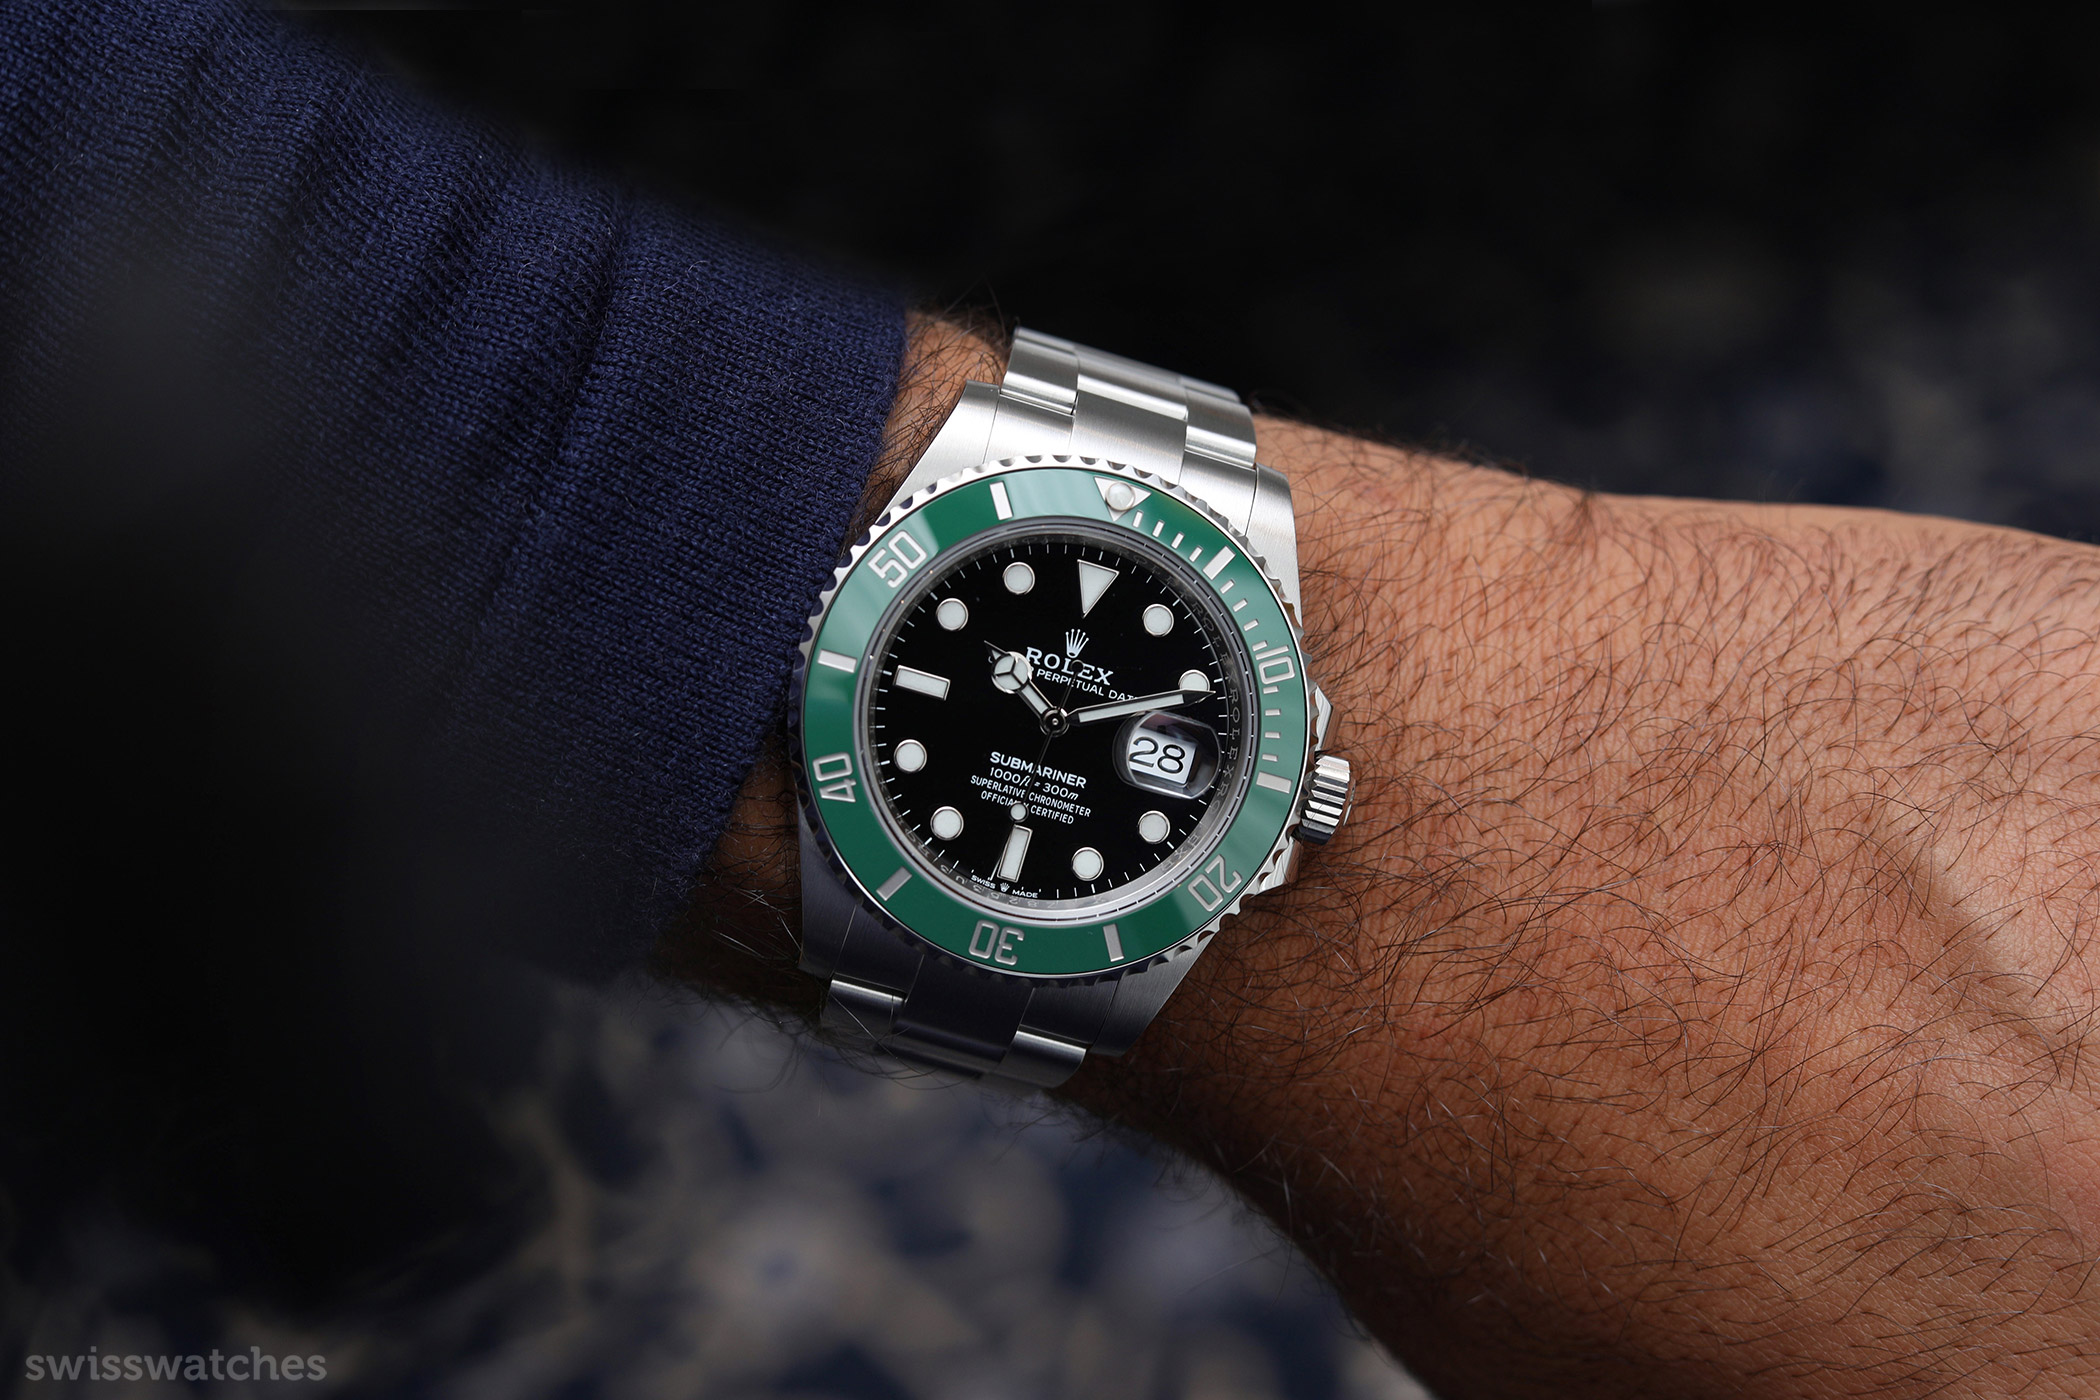 7 DAYS IN A WEEK  WEARING THE ROLEX SUBMARINER DATE 126610 